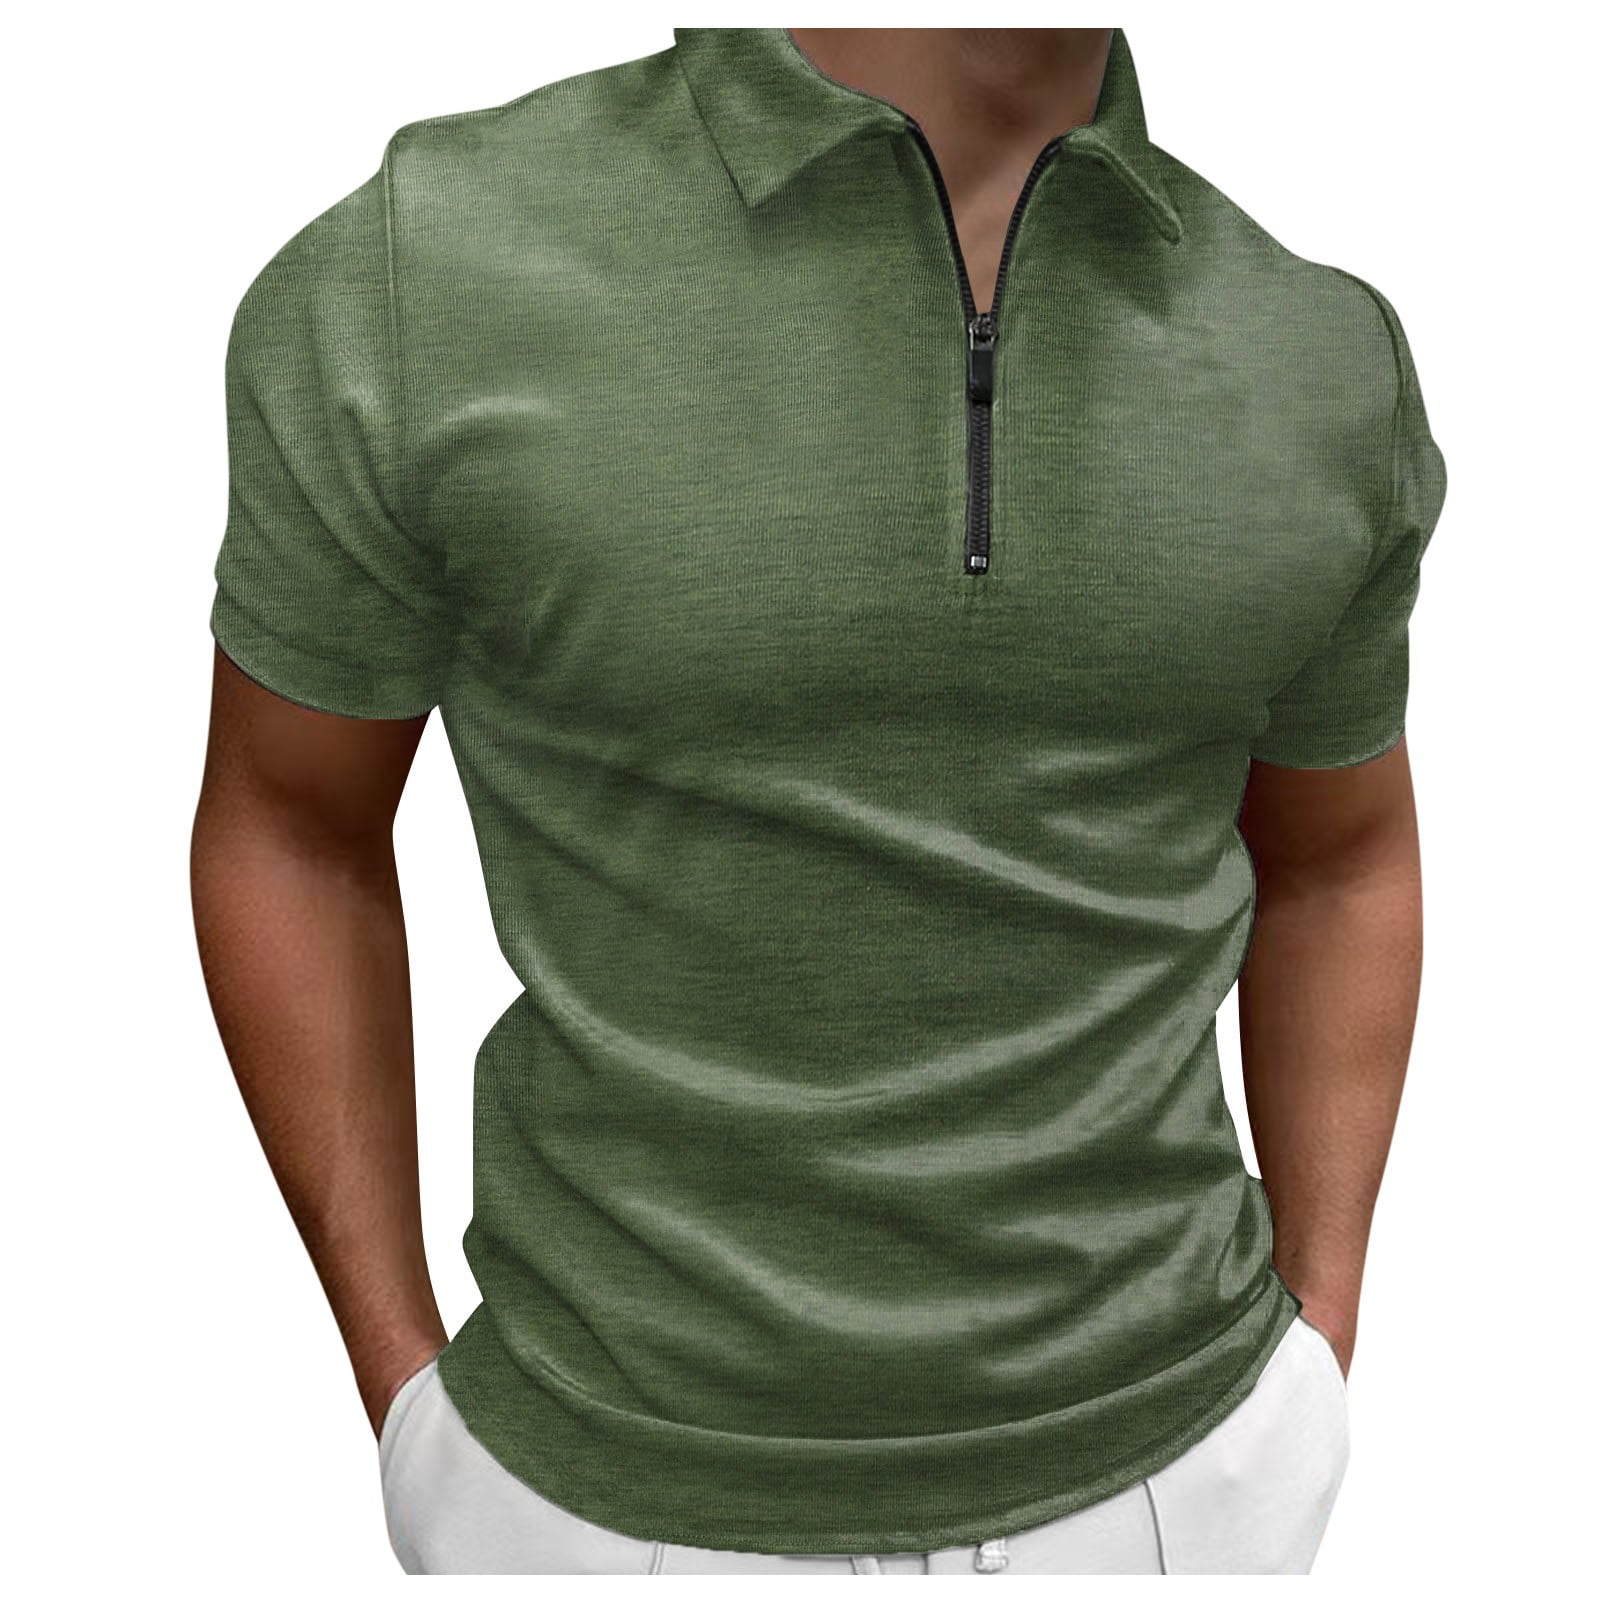 Akiihool Polo Shirts Casual Golf Shirts for Men, Dry Fit Men's Polo ...